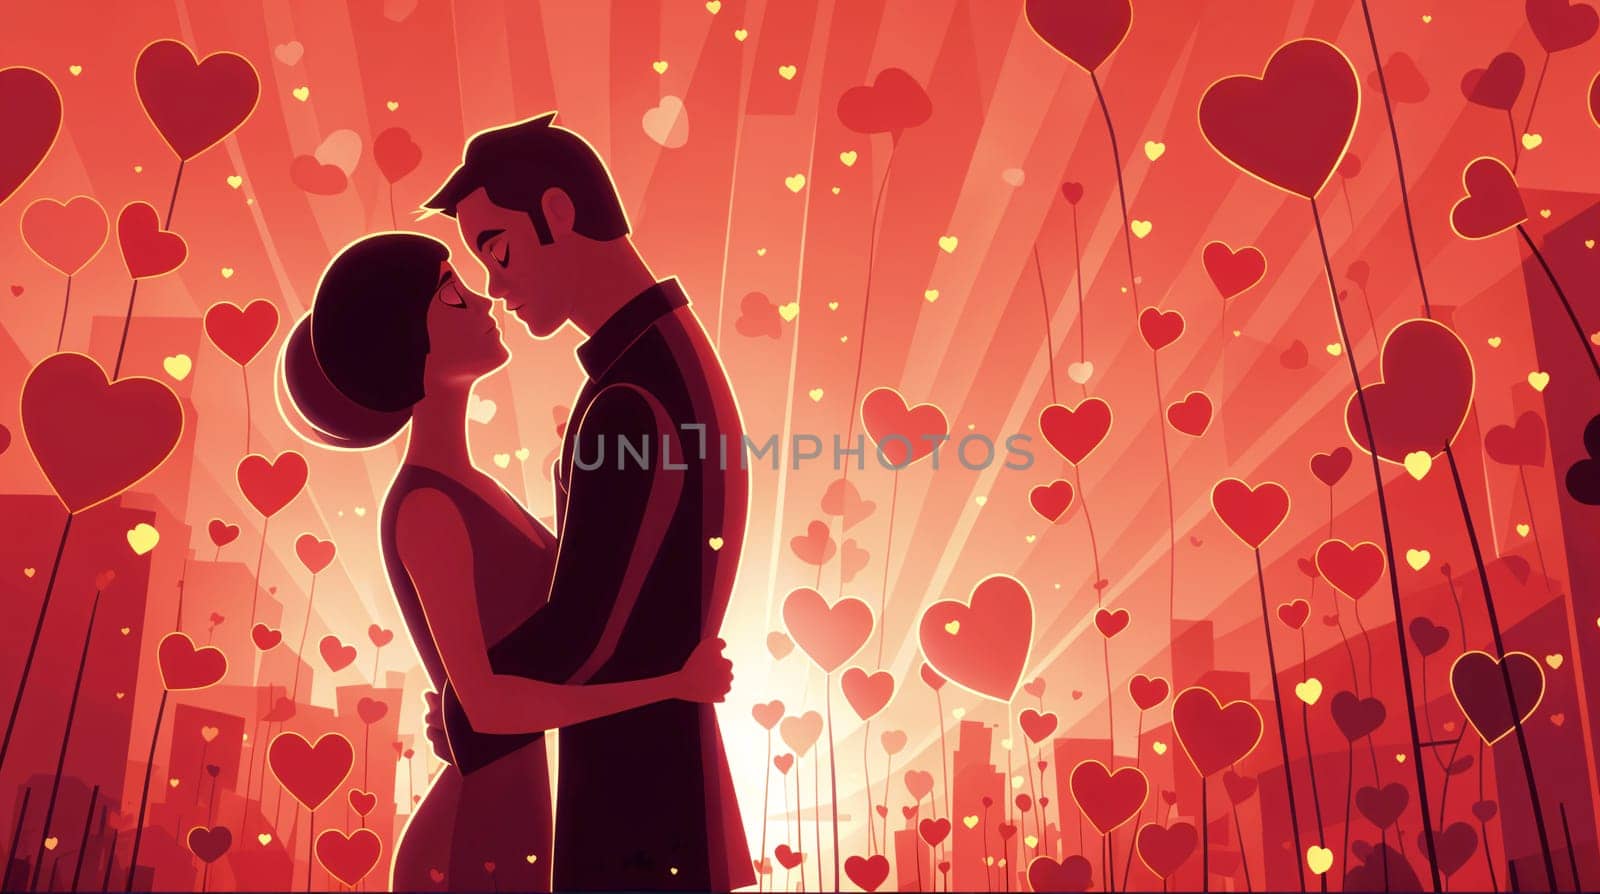 Flat illustration of a couple embracing, surrounded by hearts and city skyline by chrisroll